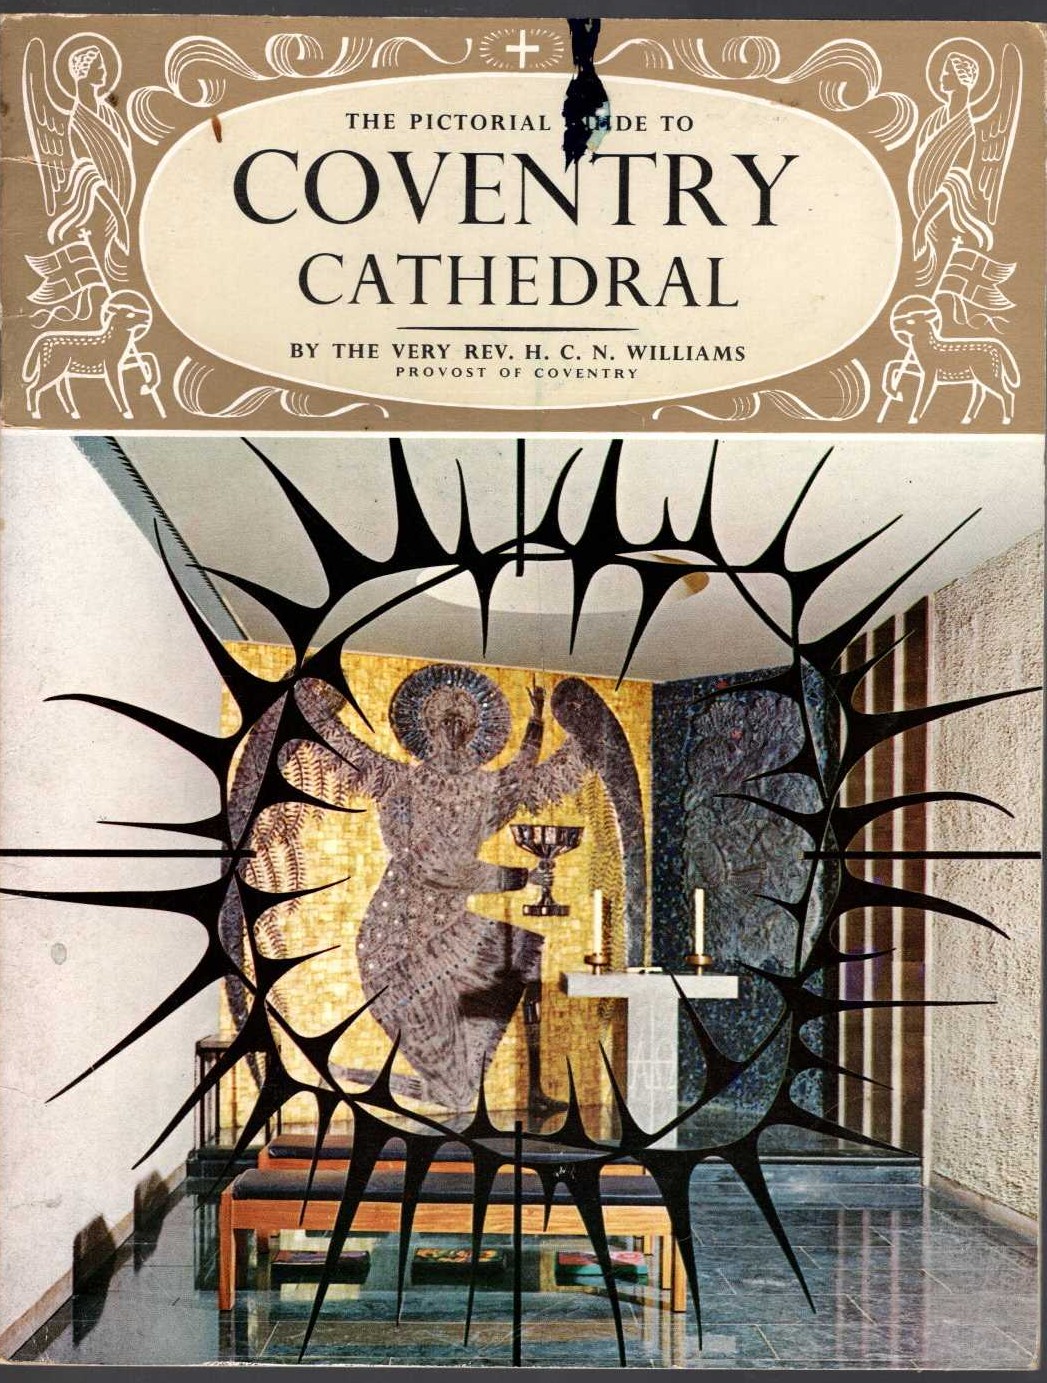 \ THE PICTORIAL GUIDE TO COVENTRY CATHEDRAL by H.C.N.Willaims front book cover image